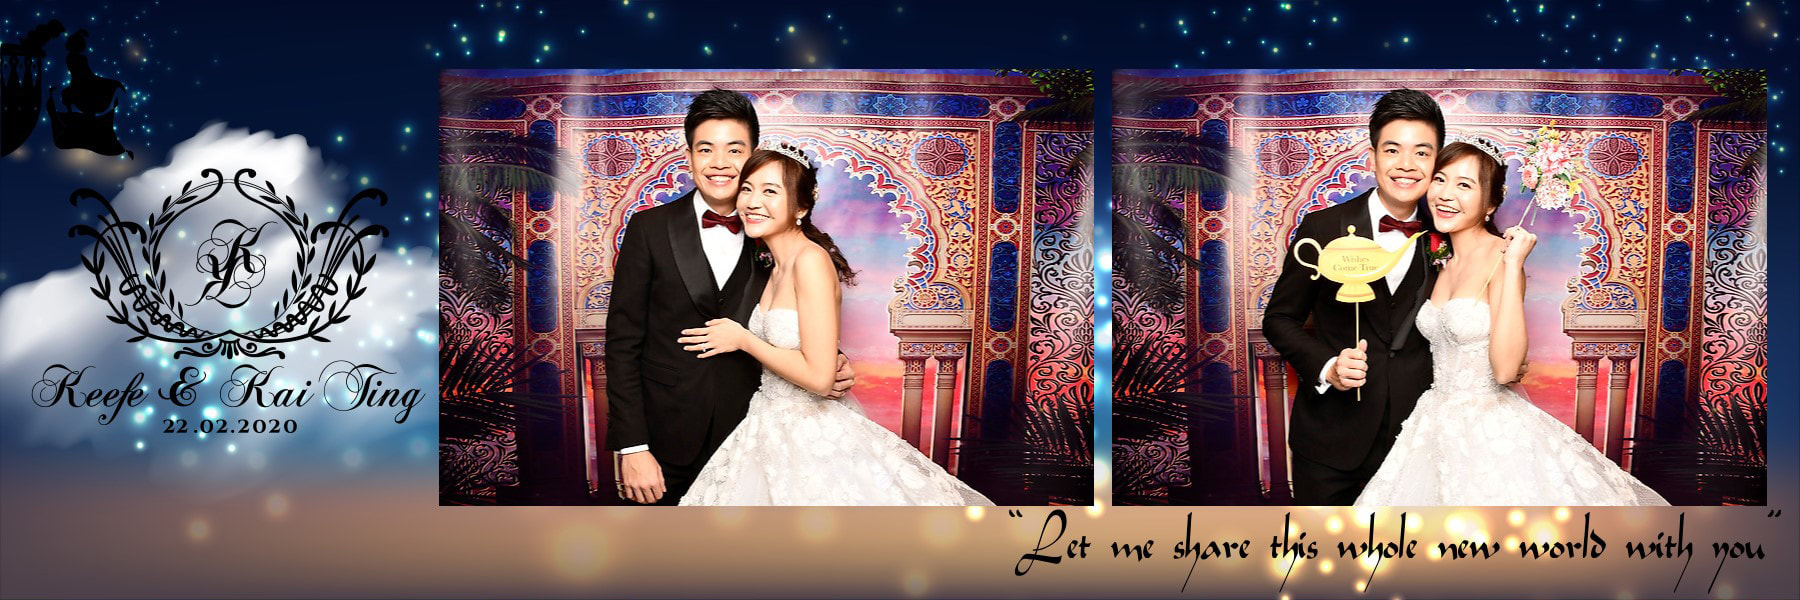 wedding photobooth in singapore with customisable unique backdrop design